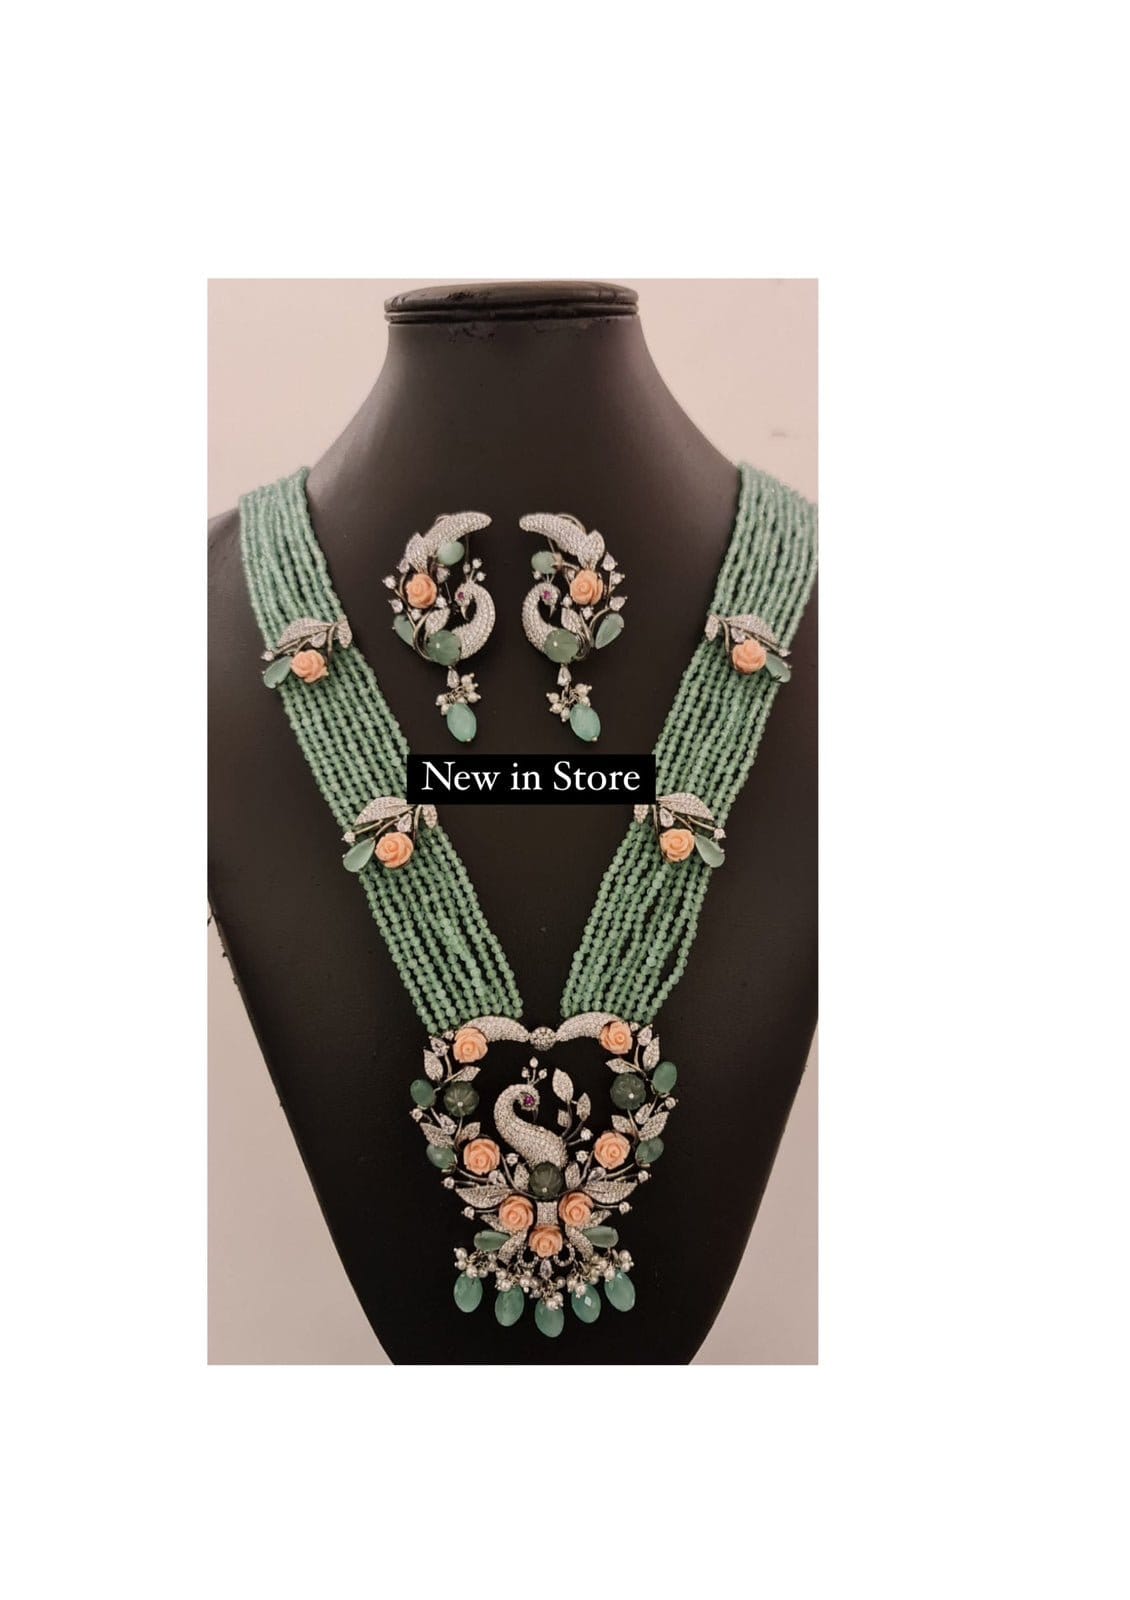 Victorian nine layered beads heavy necklace with earrings - Alluring Accessories